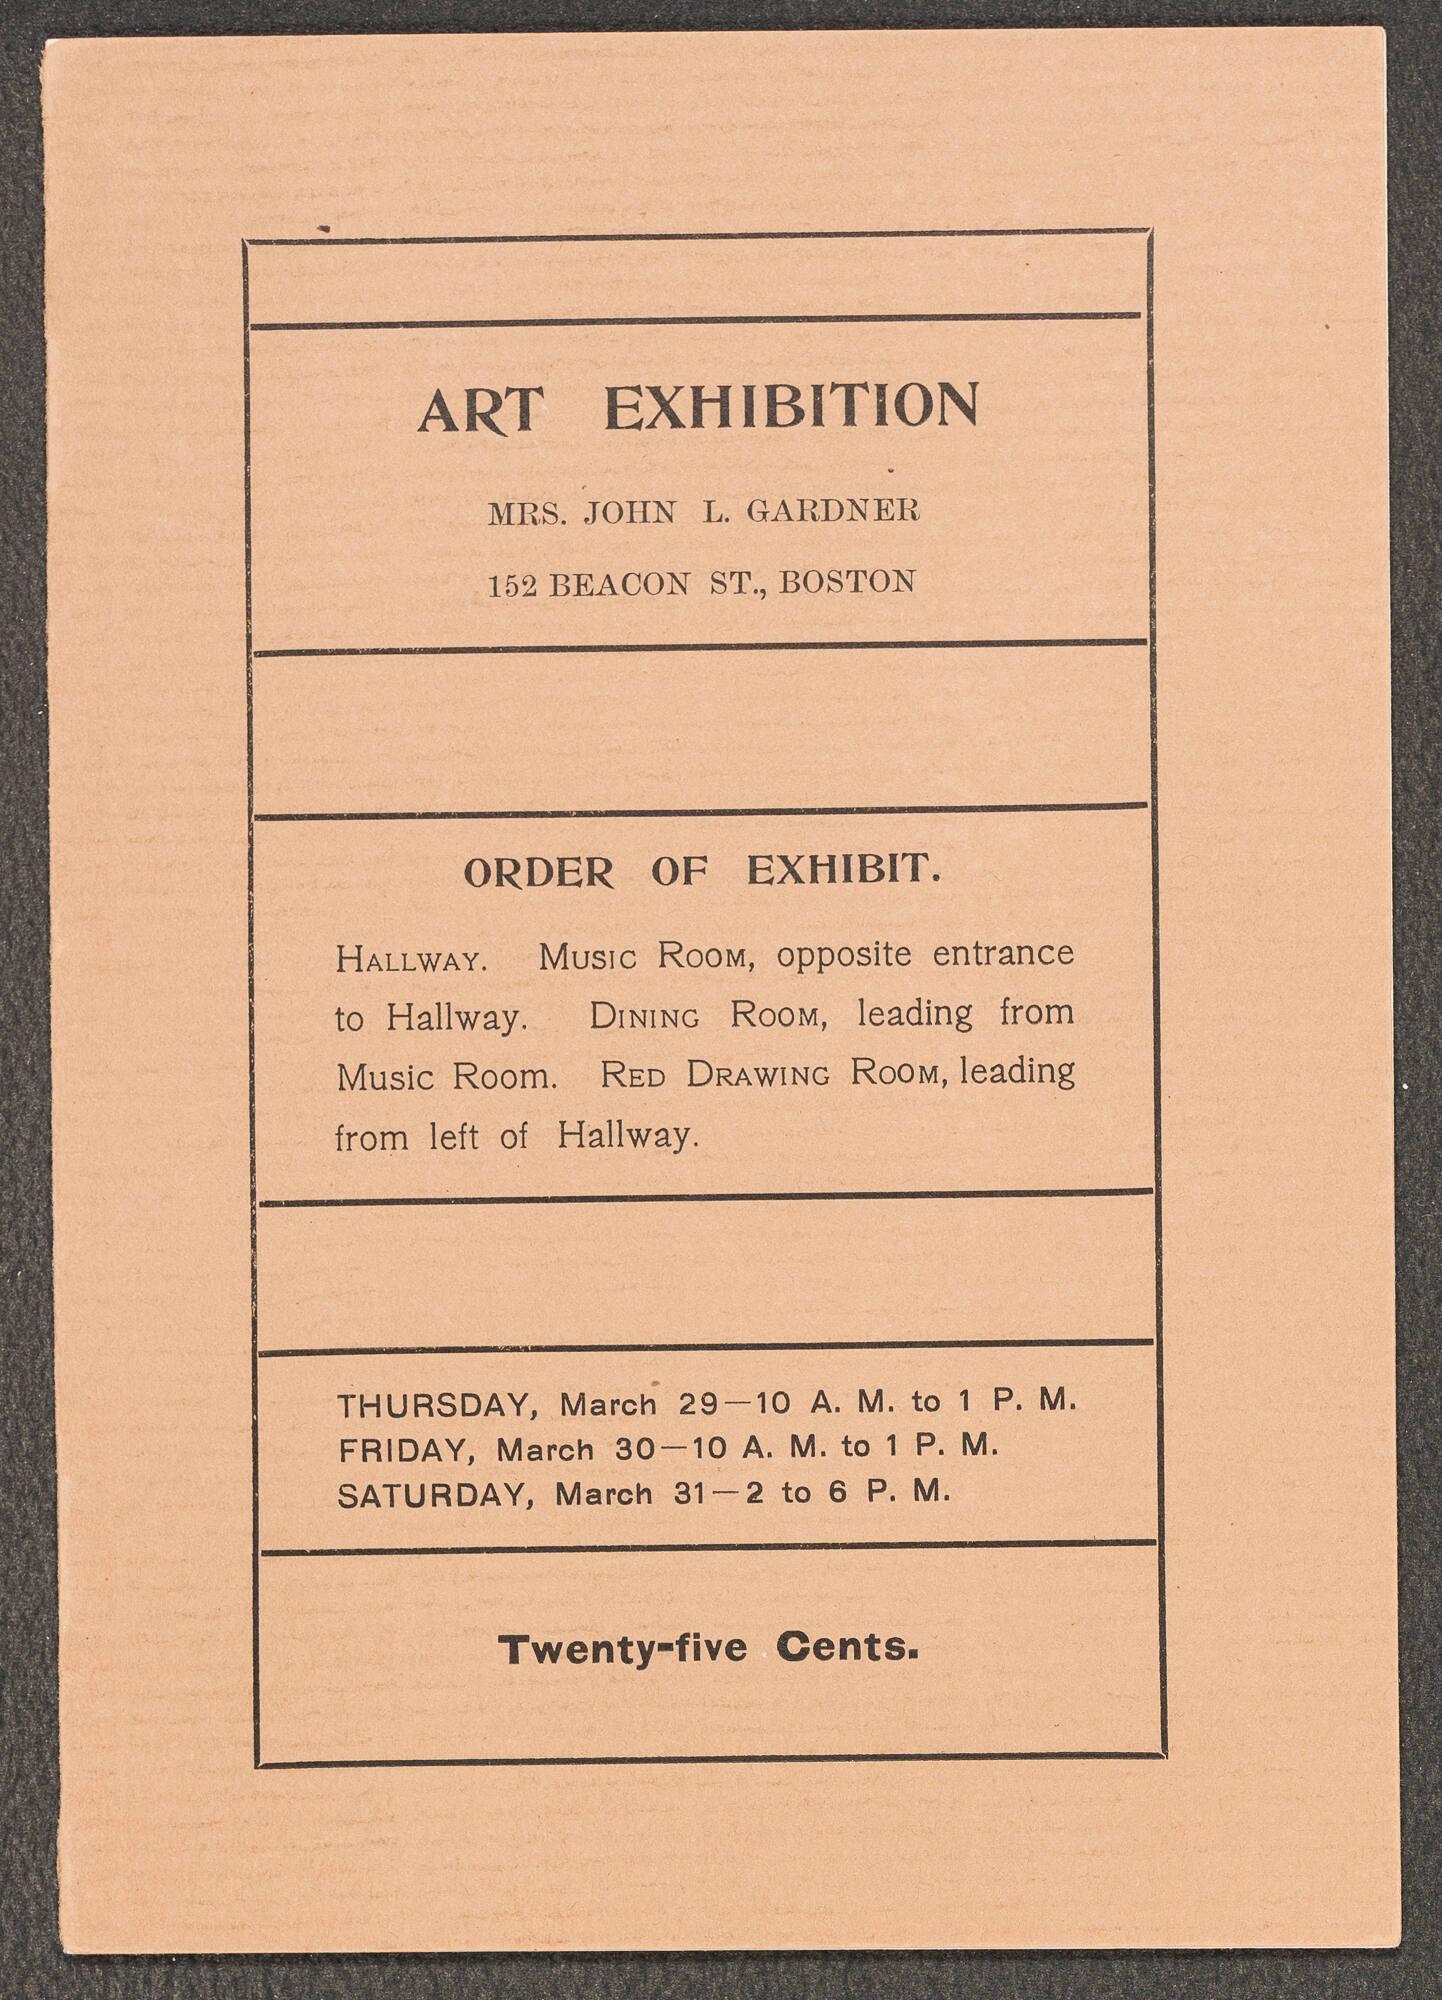 Small printed book regarding the 1900 Art Exhibition at Isabella Stewart Gardner’s Back Bay home, printed by students at Cotting School